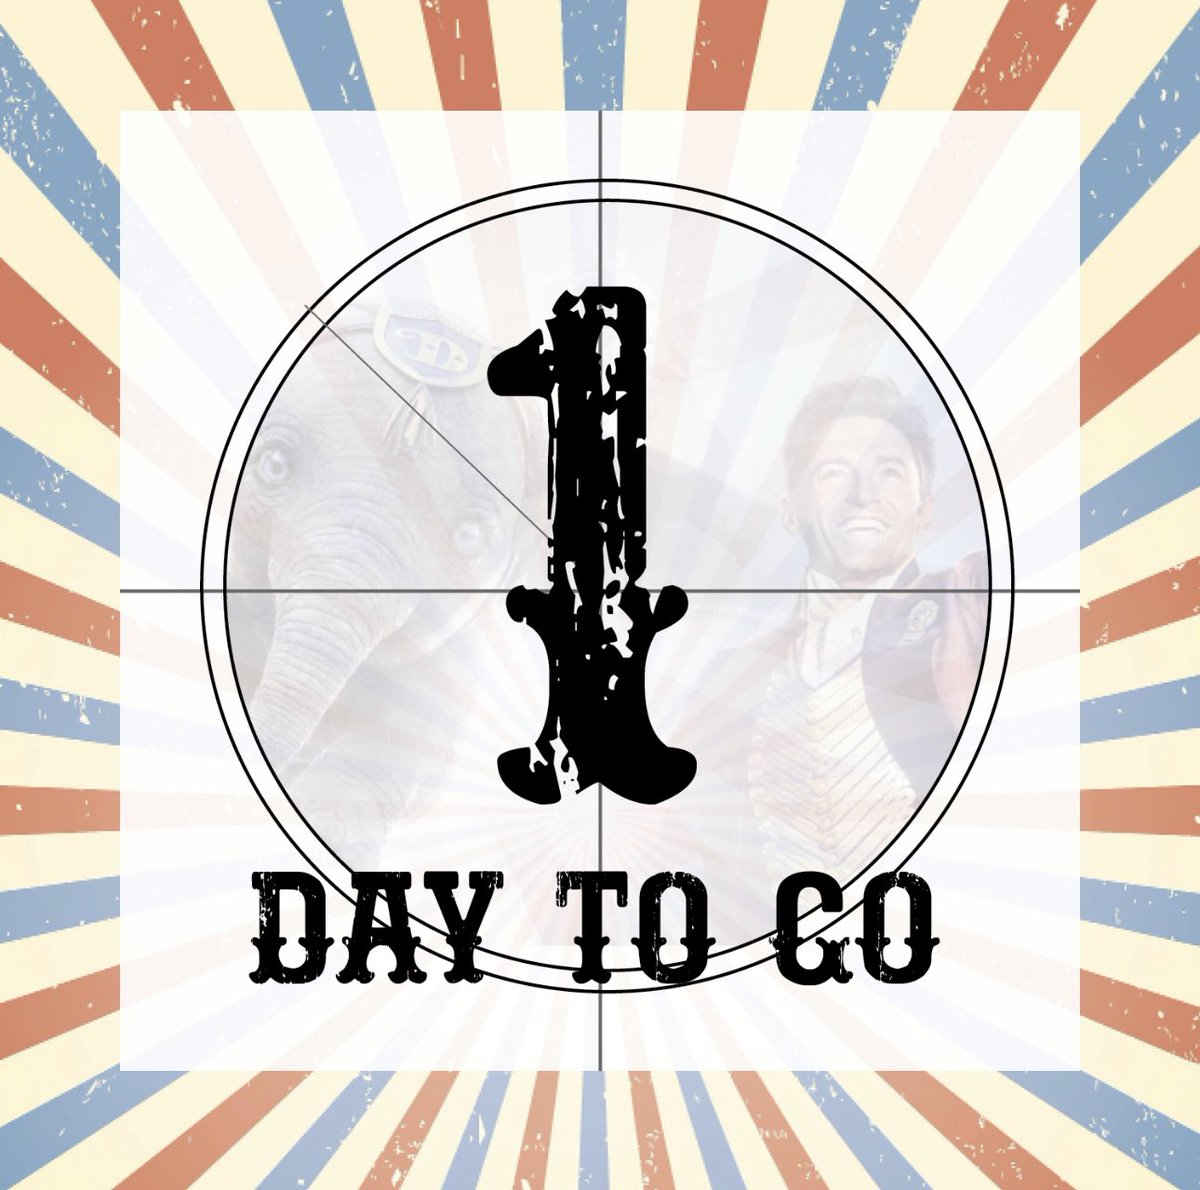 Just 24 hours until our BIG reveal, any guesses on what we might have up our sleeve? 👀🍿🎪 #ComingSoon #ActiveTameside #Fuel4Fun #TamesideRocks #CommunityEvent #WhatsOnInTameside @TamesideCouncil @active_tameside